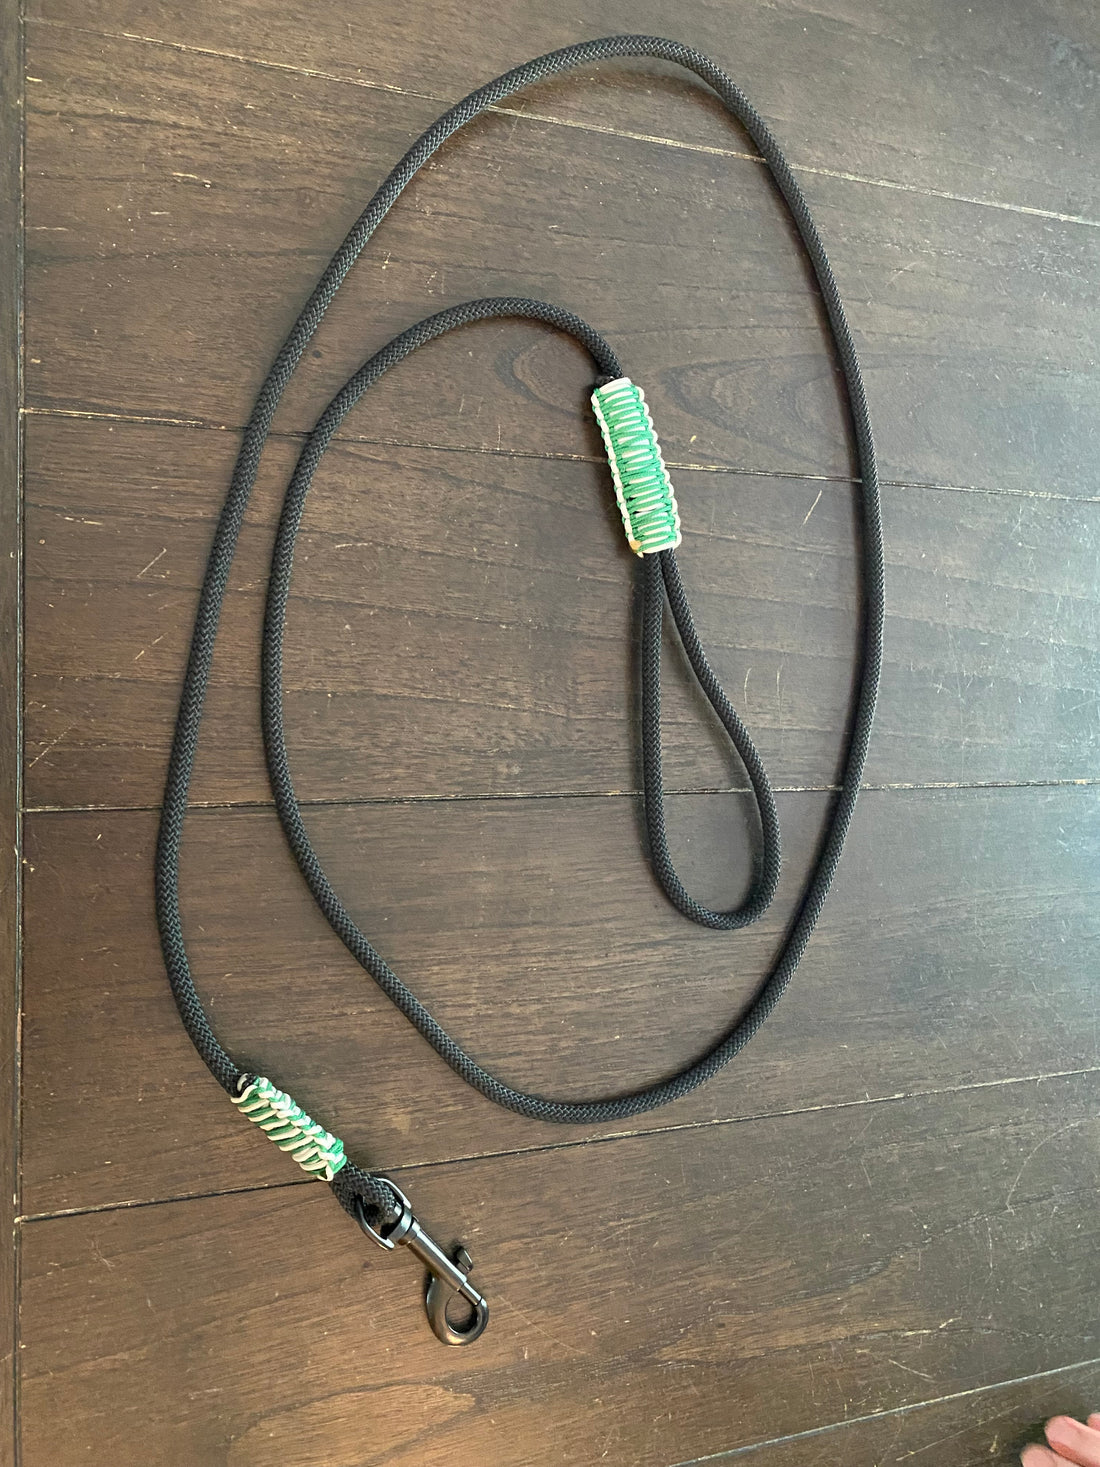 New Leash Designs With Static Cord